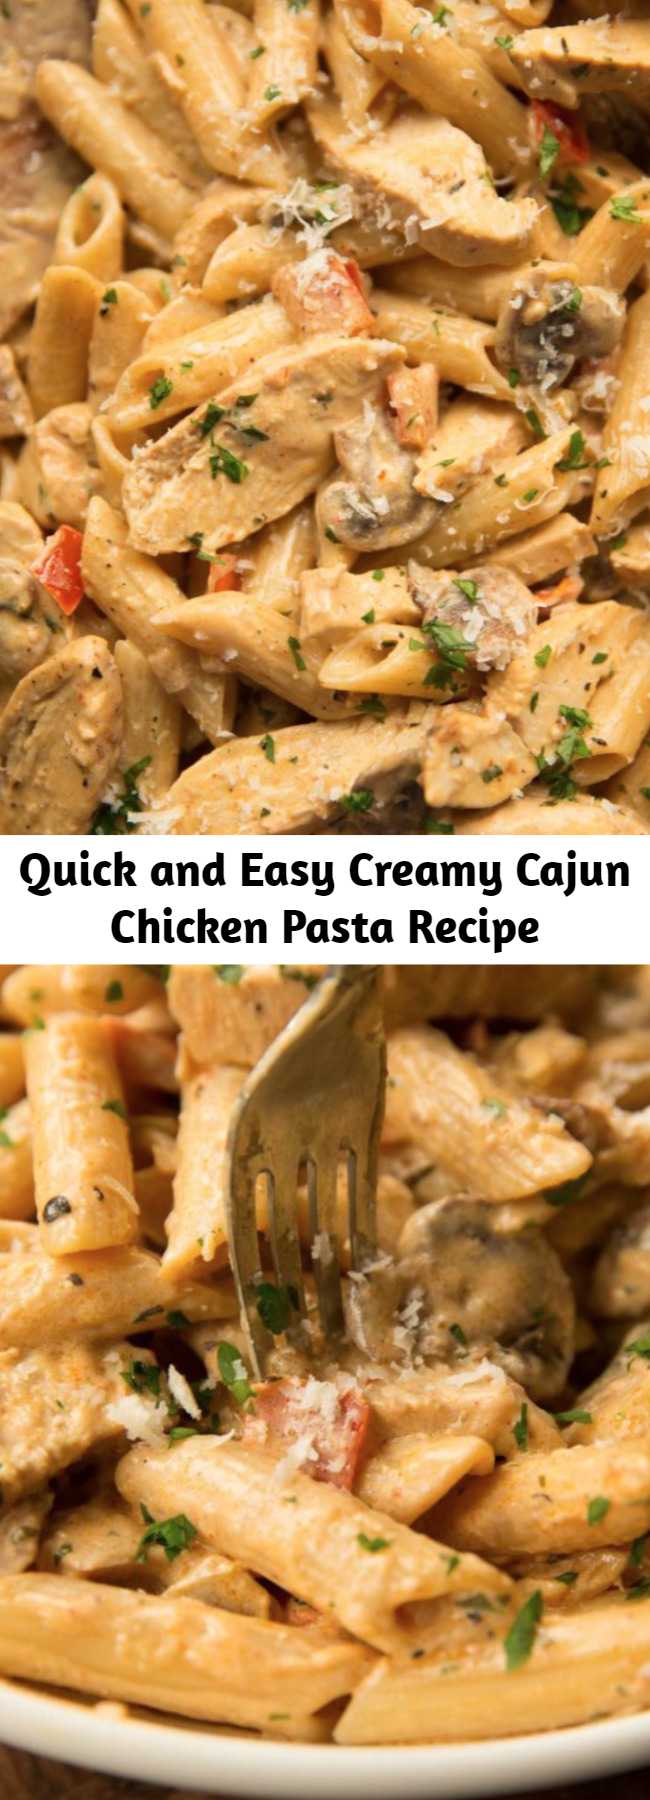 Quick and Easy Creamy Cajun Chicken Pasta Recipe - This Creamy Cajun Chicken Pasta couldn't be any more delicious if it tried! Better still, it makes the perfect quick and easy family dinner. Serves 4 big portions, 5 modest. #cajun #cajunchicken #chicken #pasta